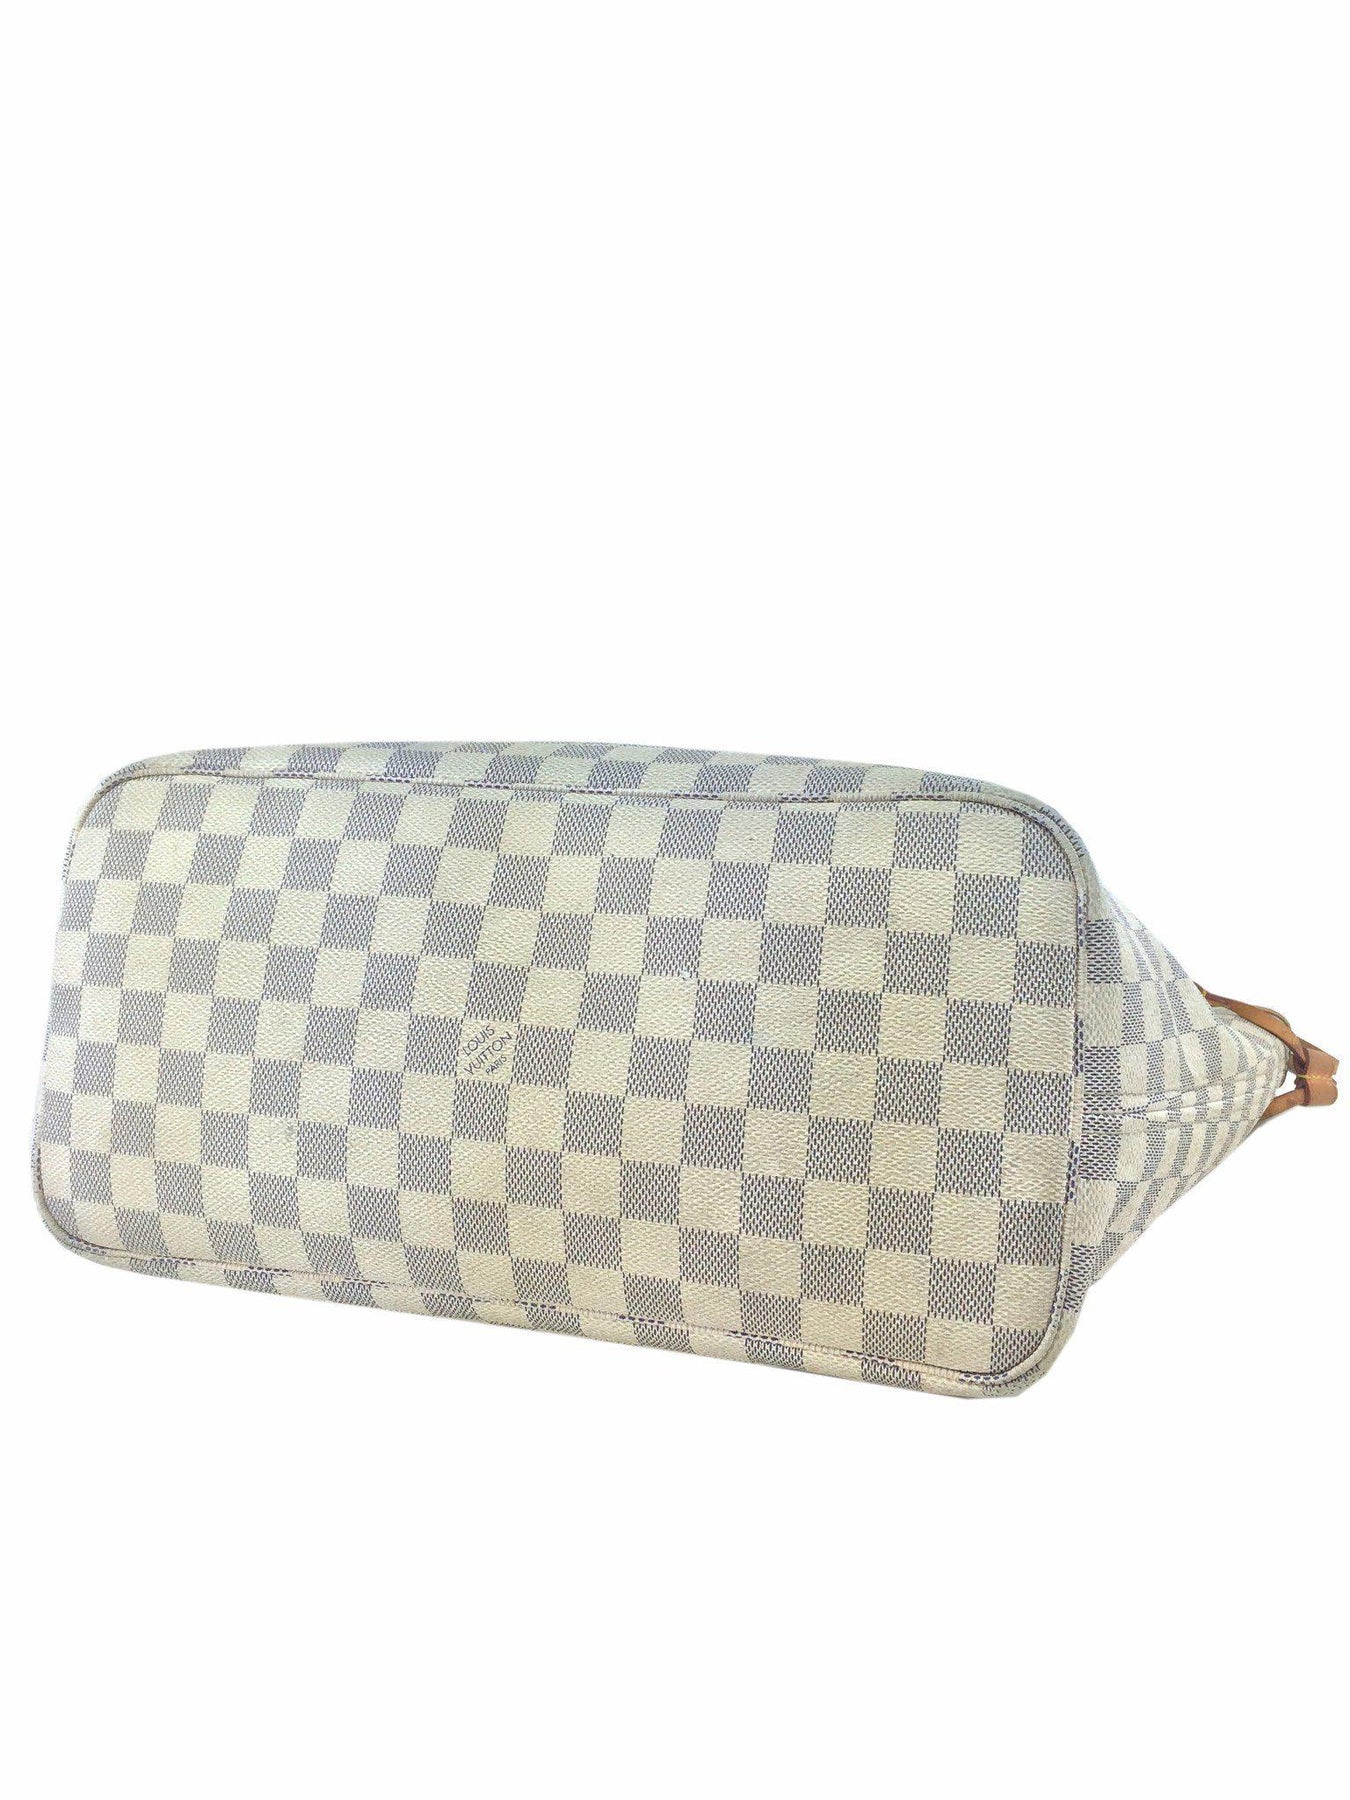 Louis Vuitton Damier Azur Neverfull MM Tote Bag - Consigned Designs